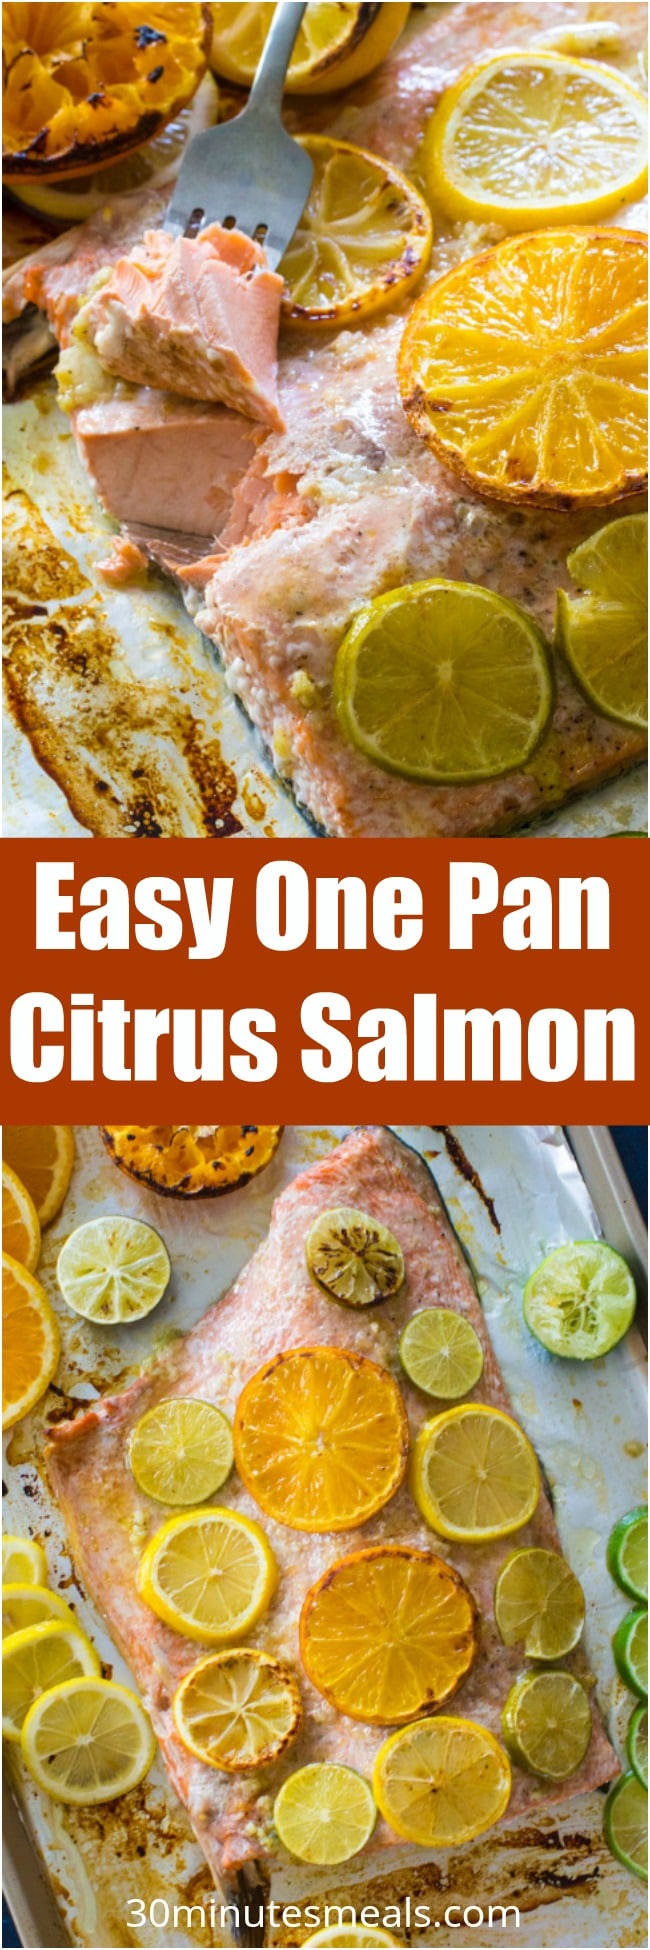 Easy One Pan Honey Citrus Salmon takes only 30 minutes to make.This healthy meal is a great combo of sweet and savory and refreshing citrus flavor.